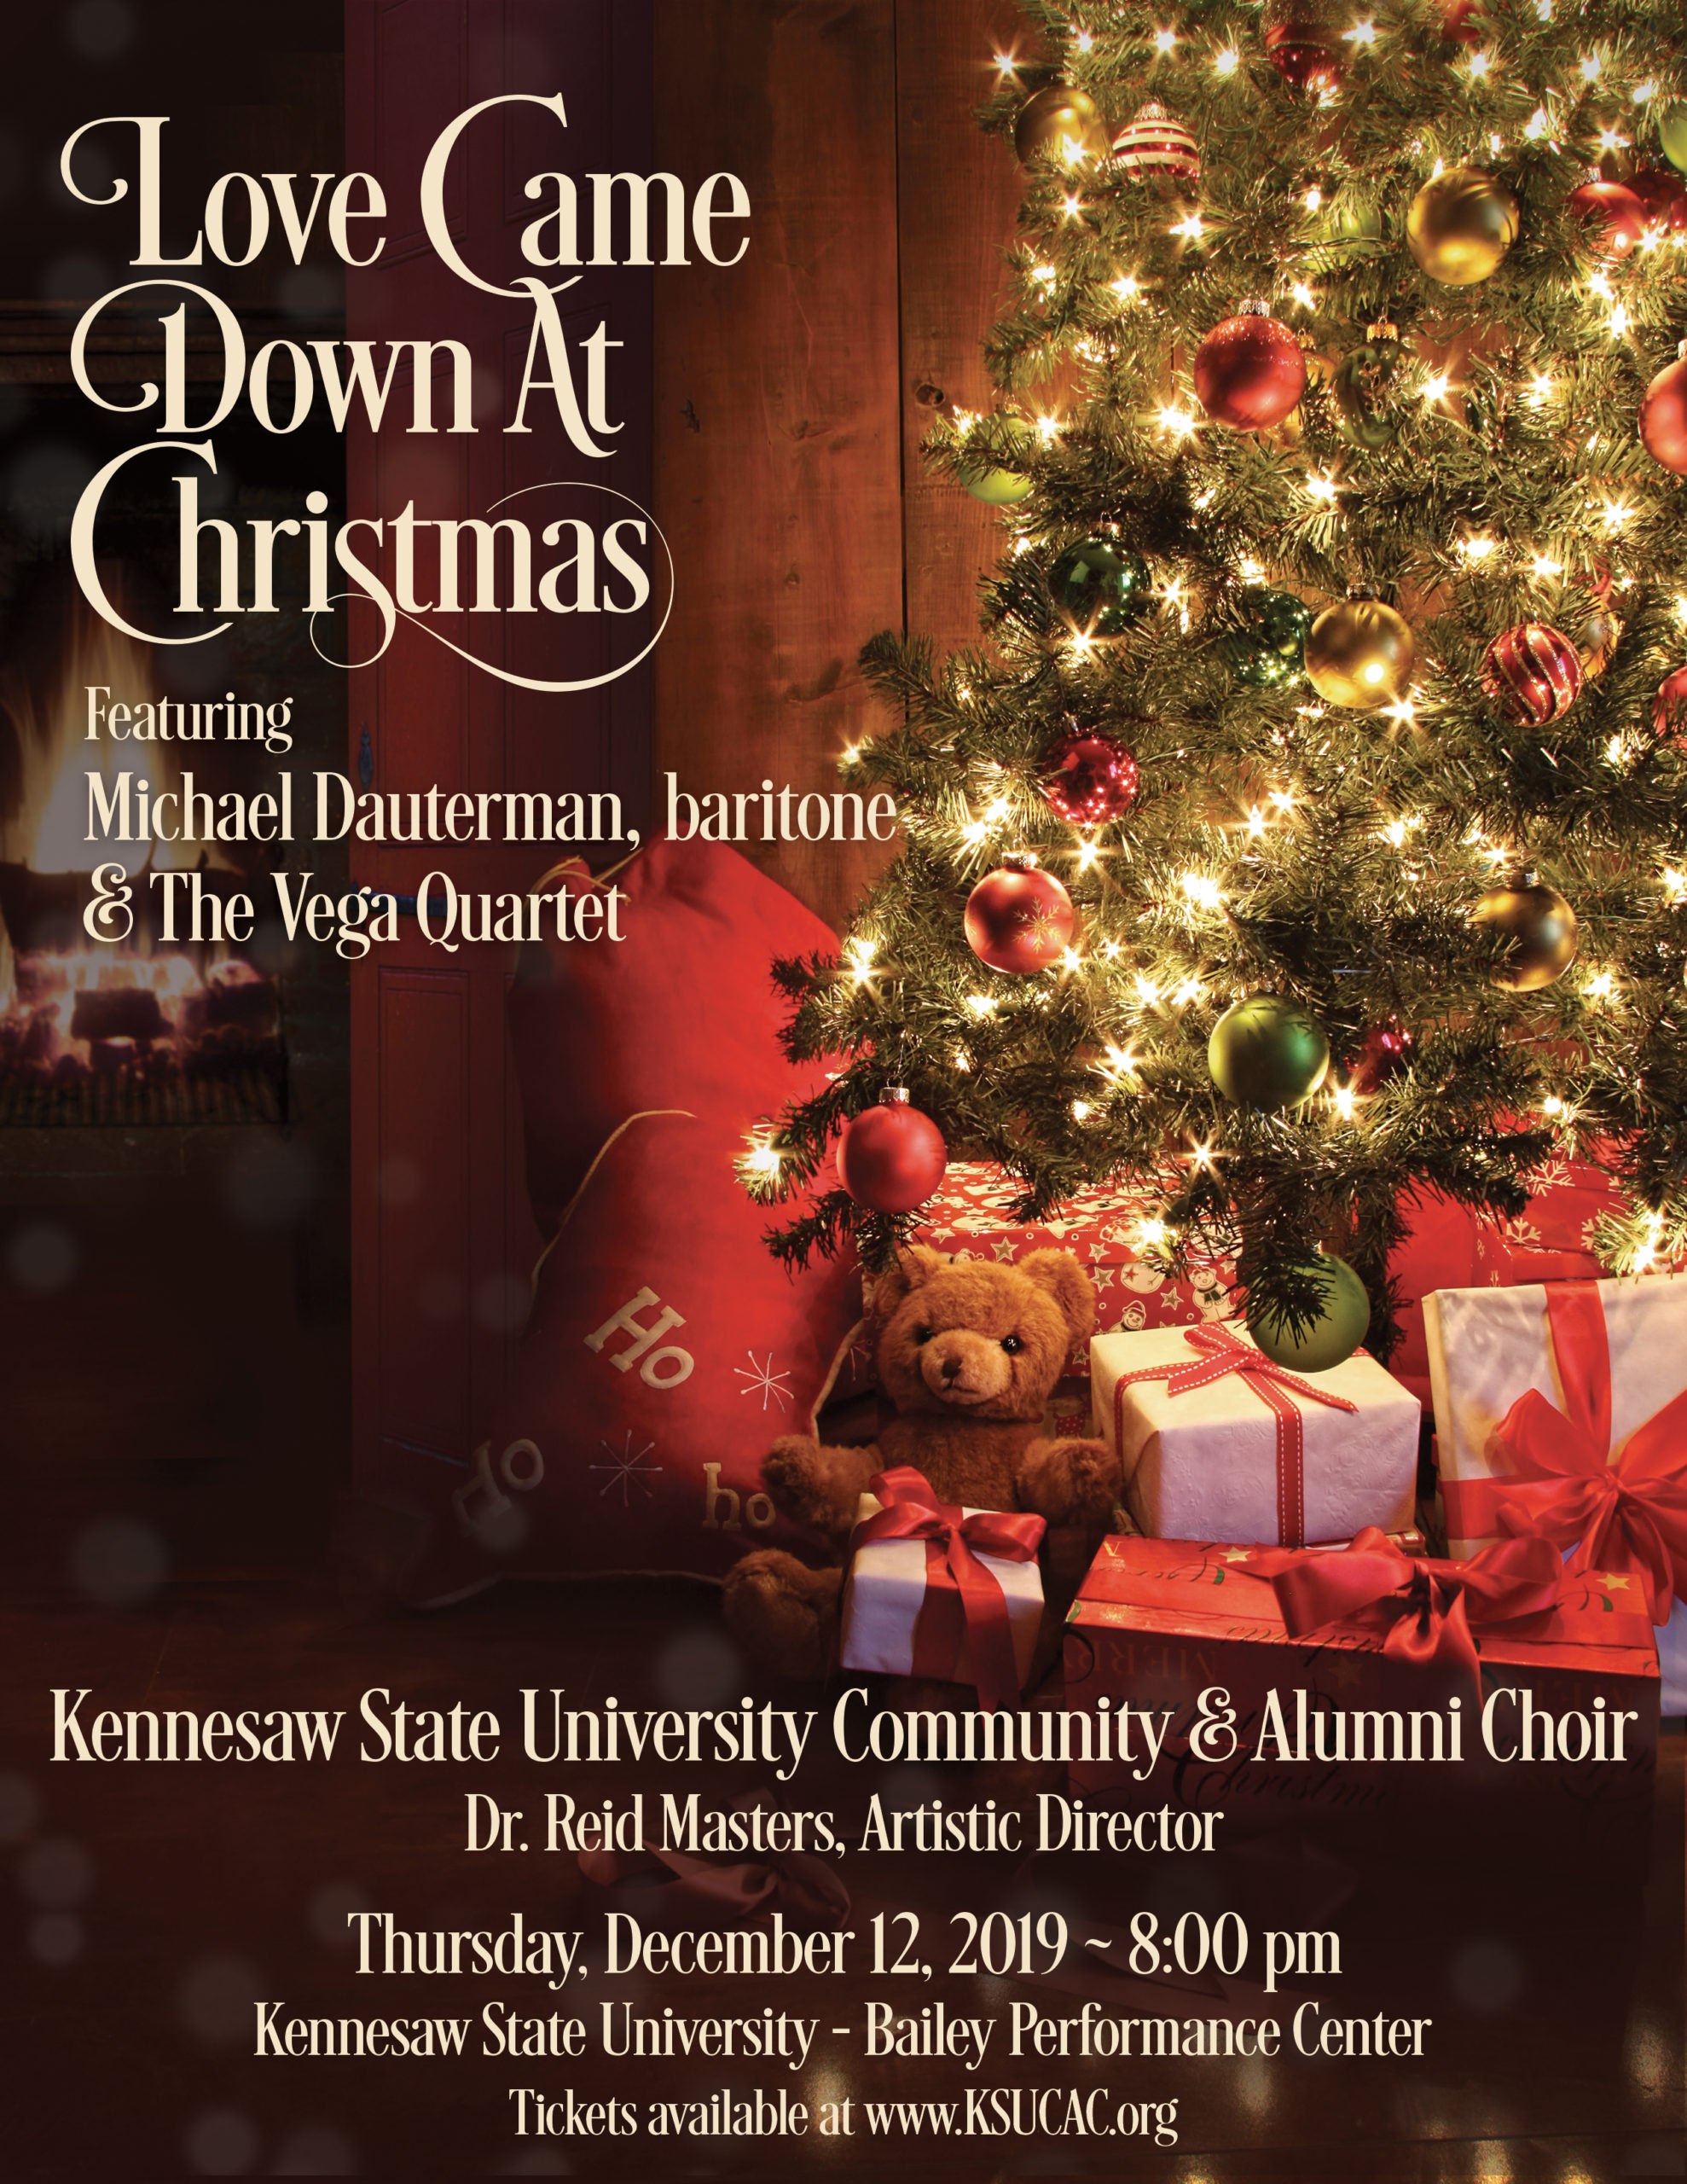 Love Came Down at Christmas Concert Program Cover